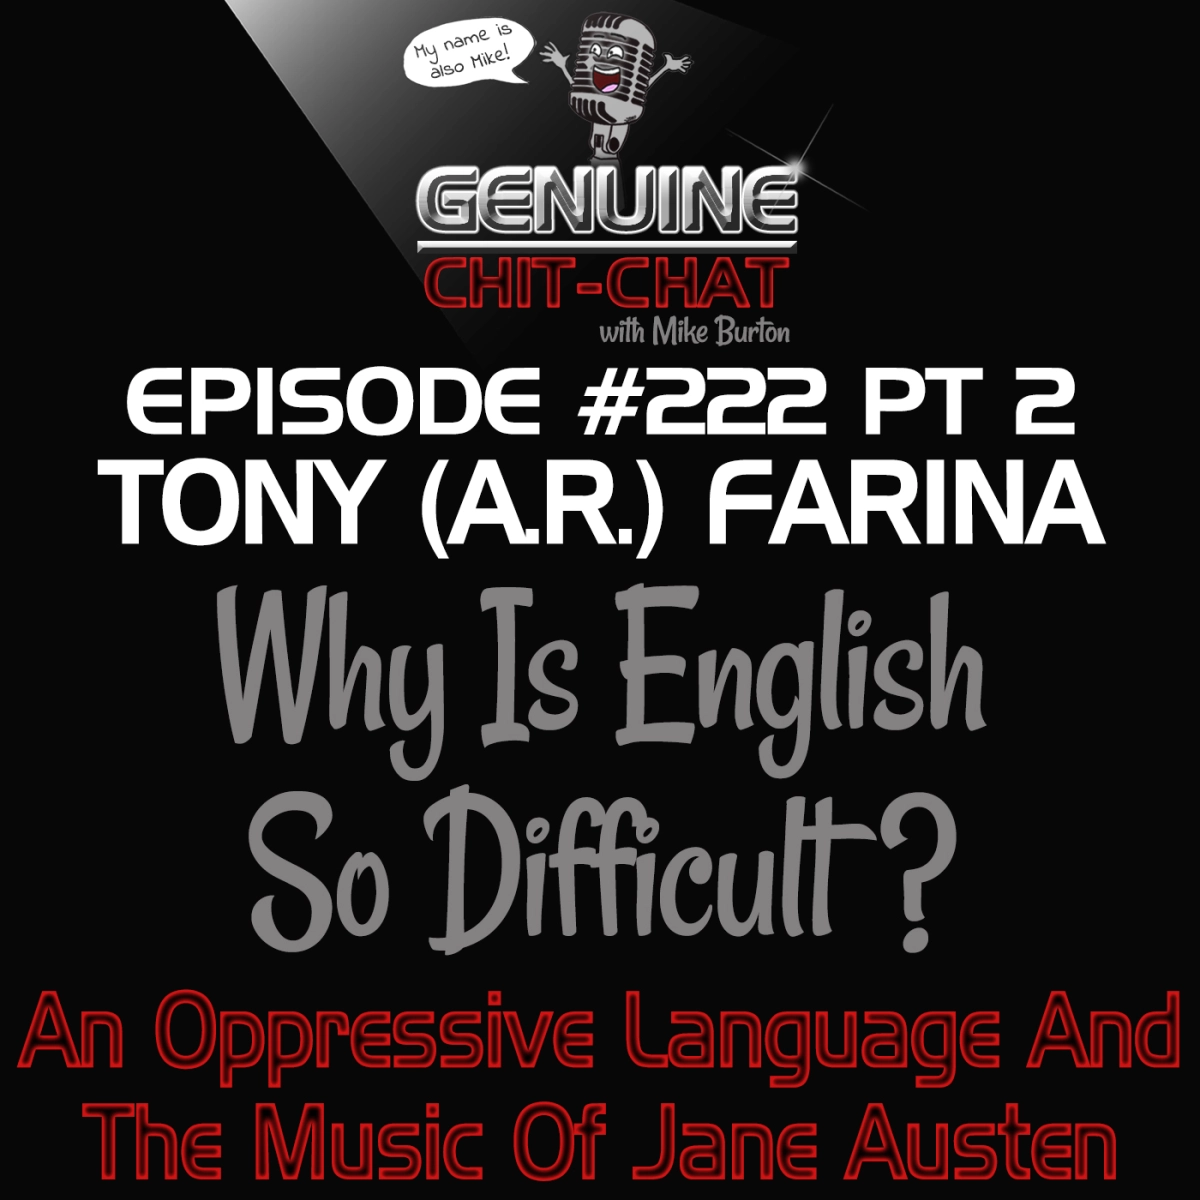 #222 P2 – Why Is English So Difficult? An Oppressive Language And The Music Of Jane Austen With Tony Farina